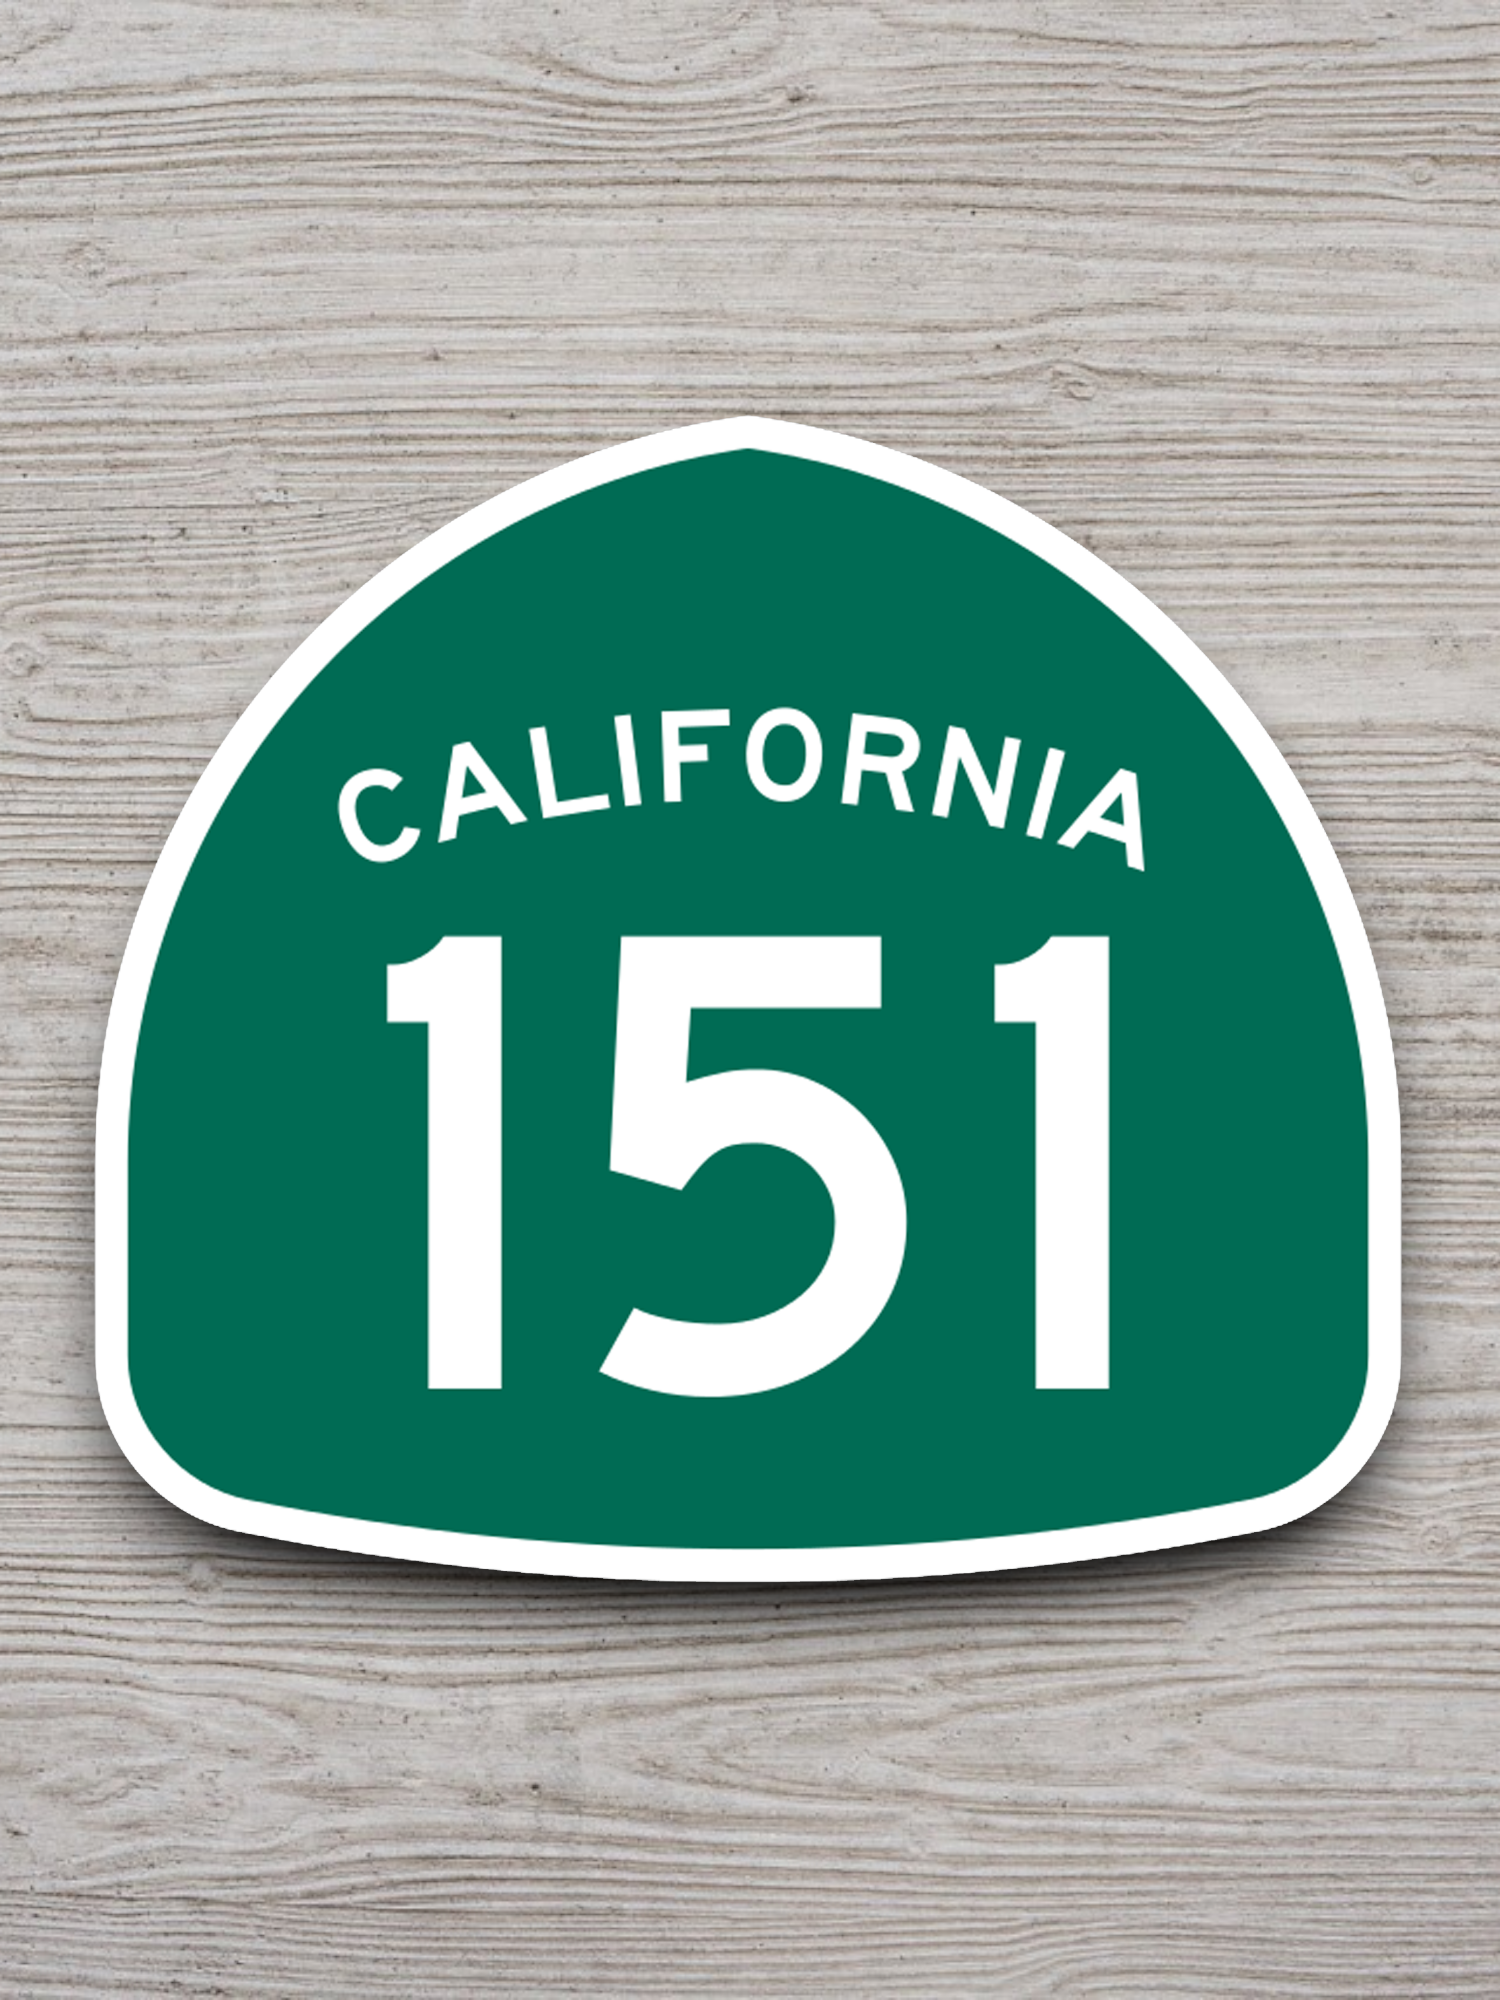 California State Route 151 Road Sign Sticker